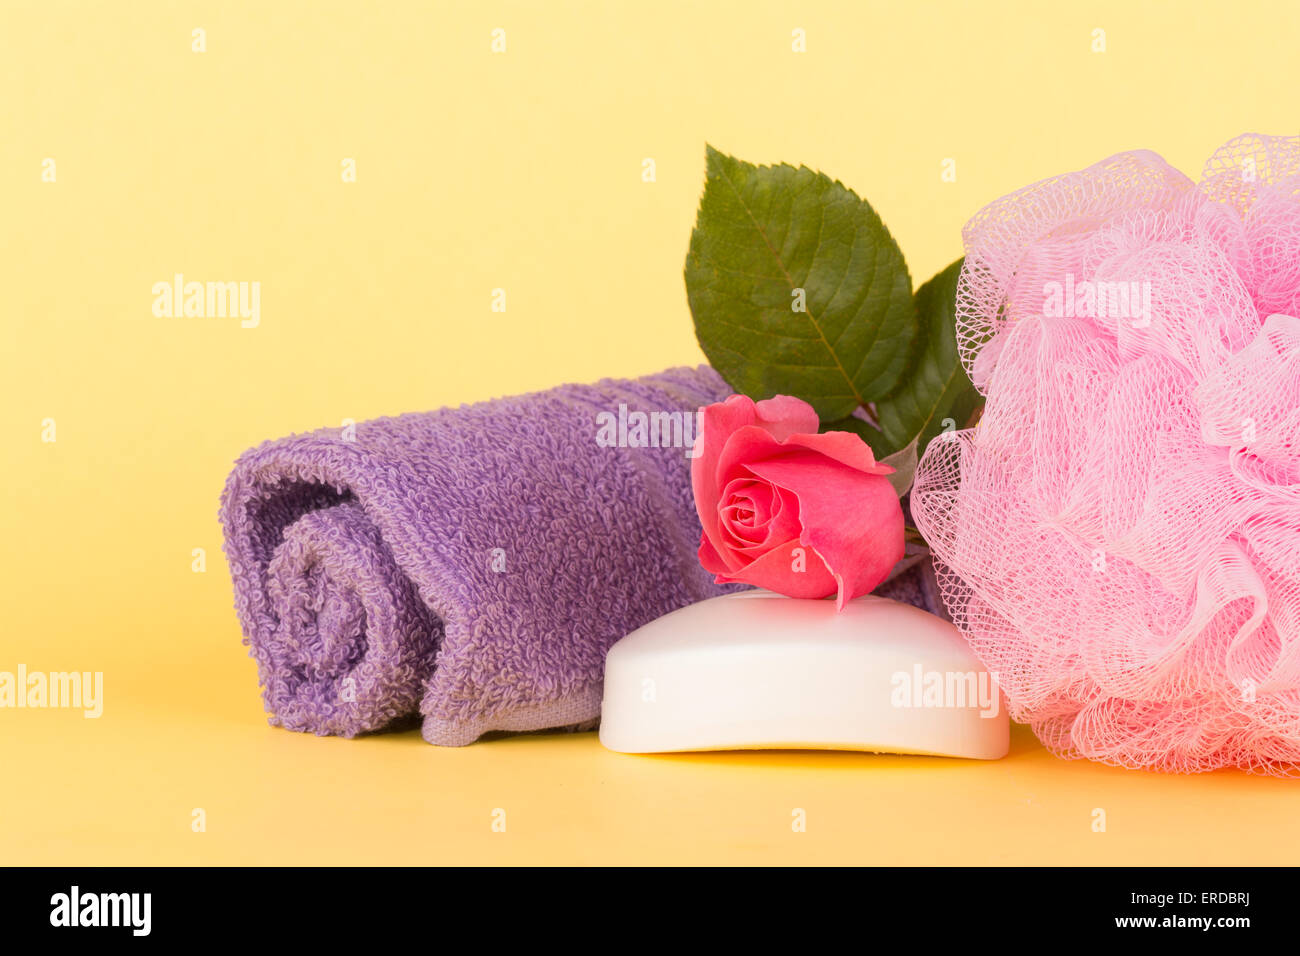 Soap topped with pink rose next to a shower puff and wash cloth against light yellow background Stock Photo